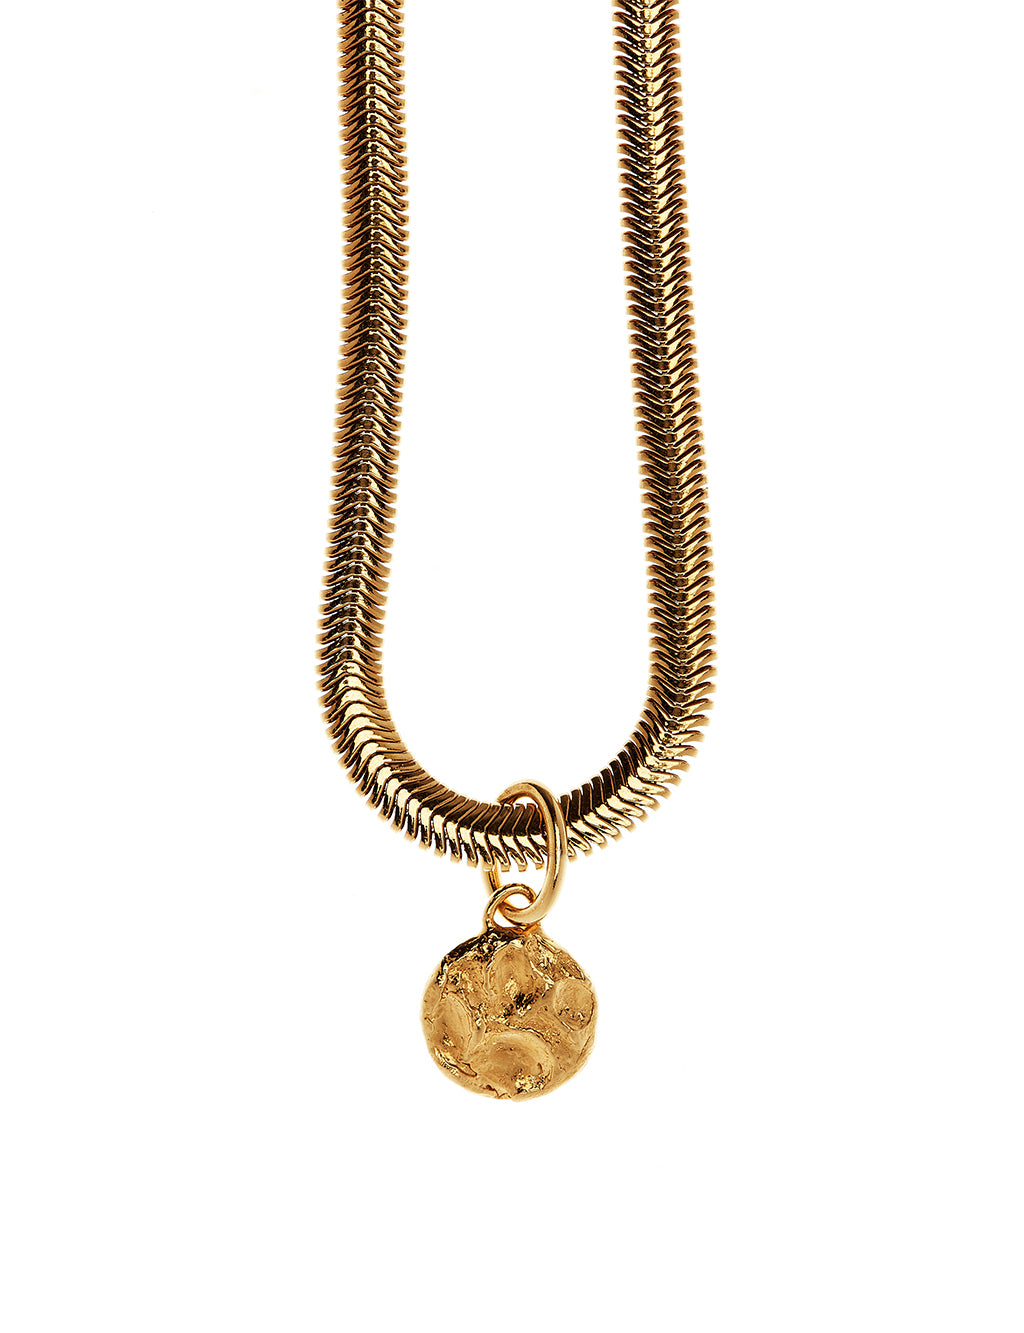 Close up of snake chain with gold vermeil pendant